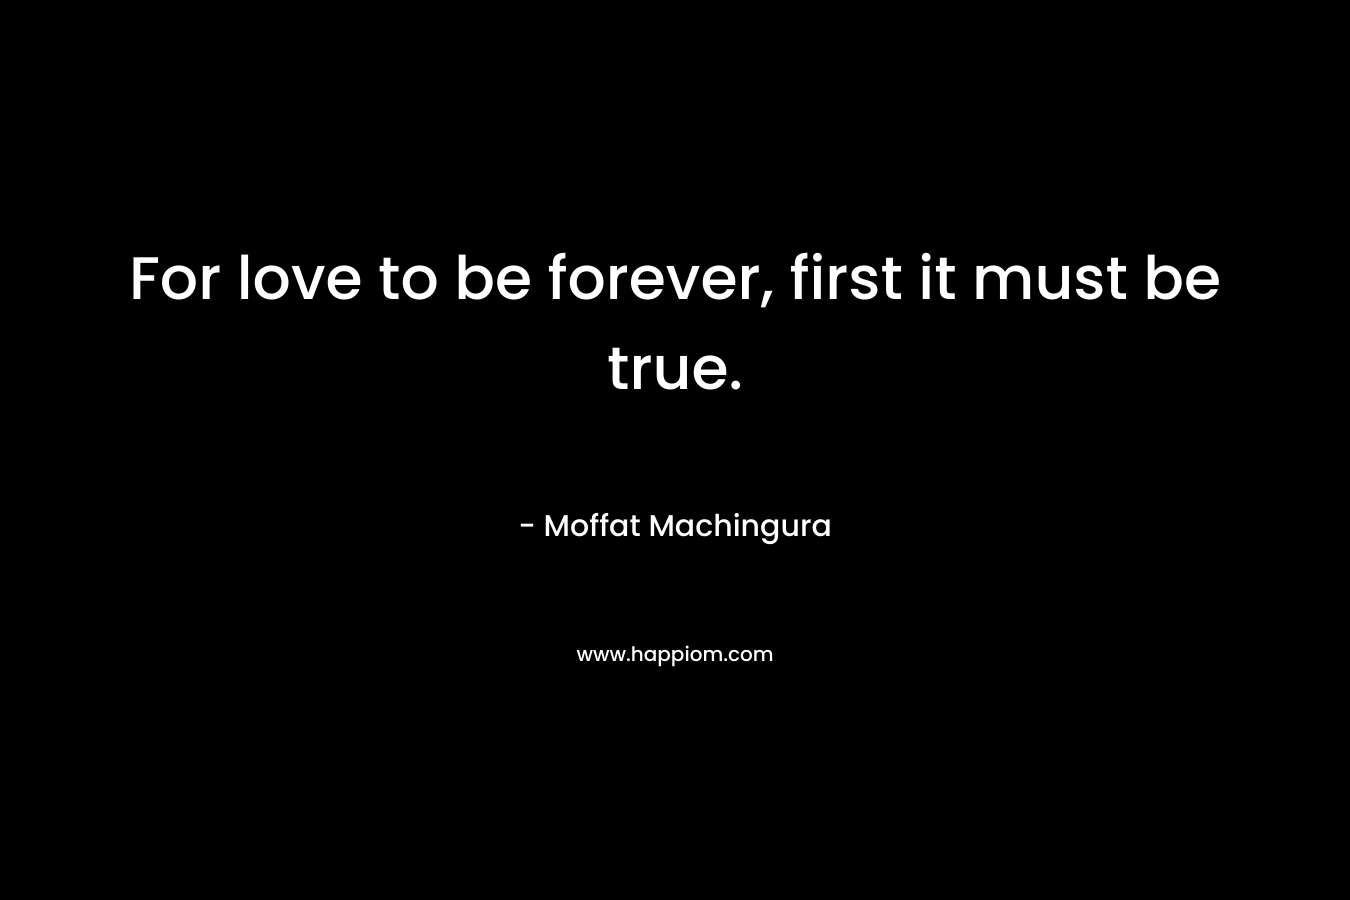 For love to be forever, first it must be true. – Moffat Machingura